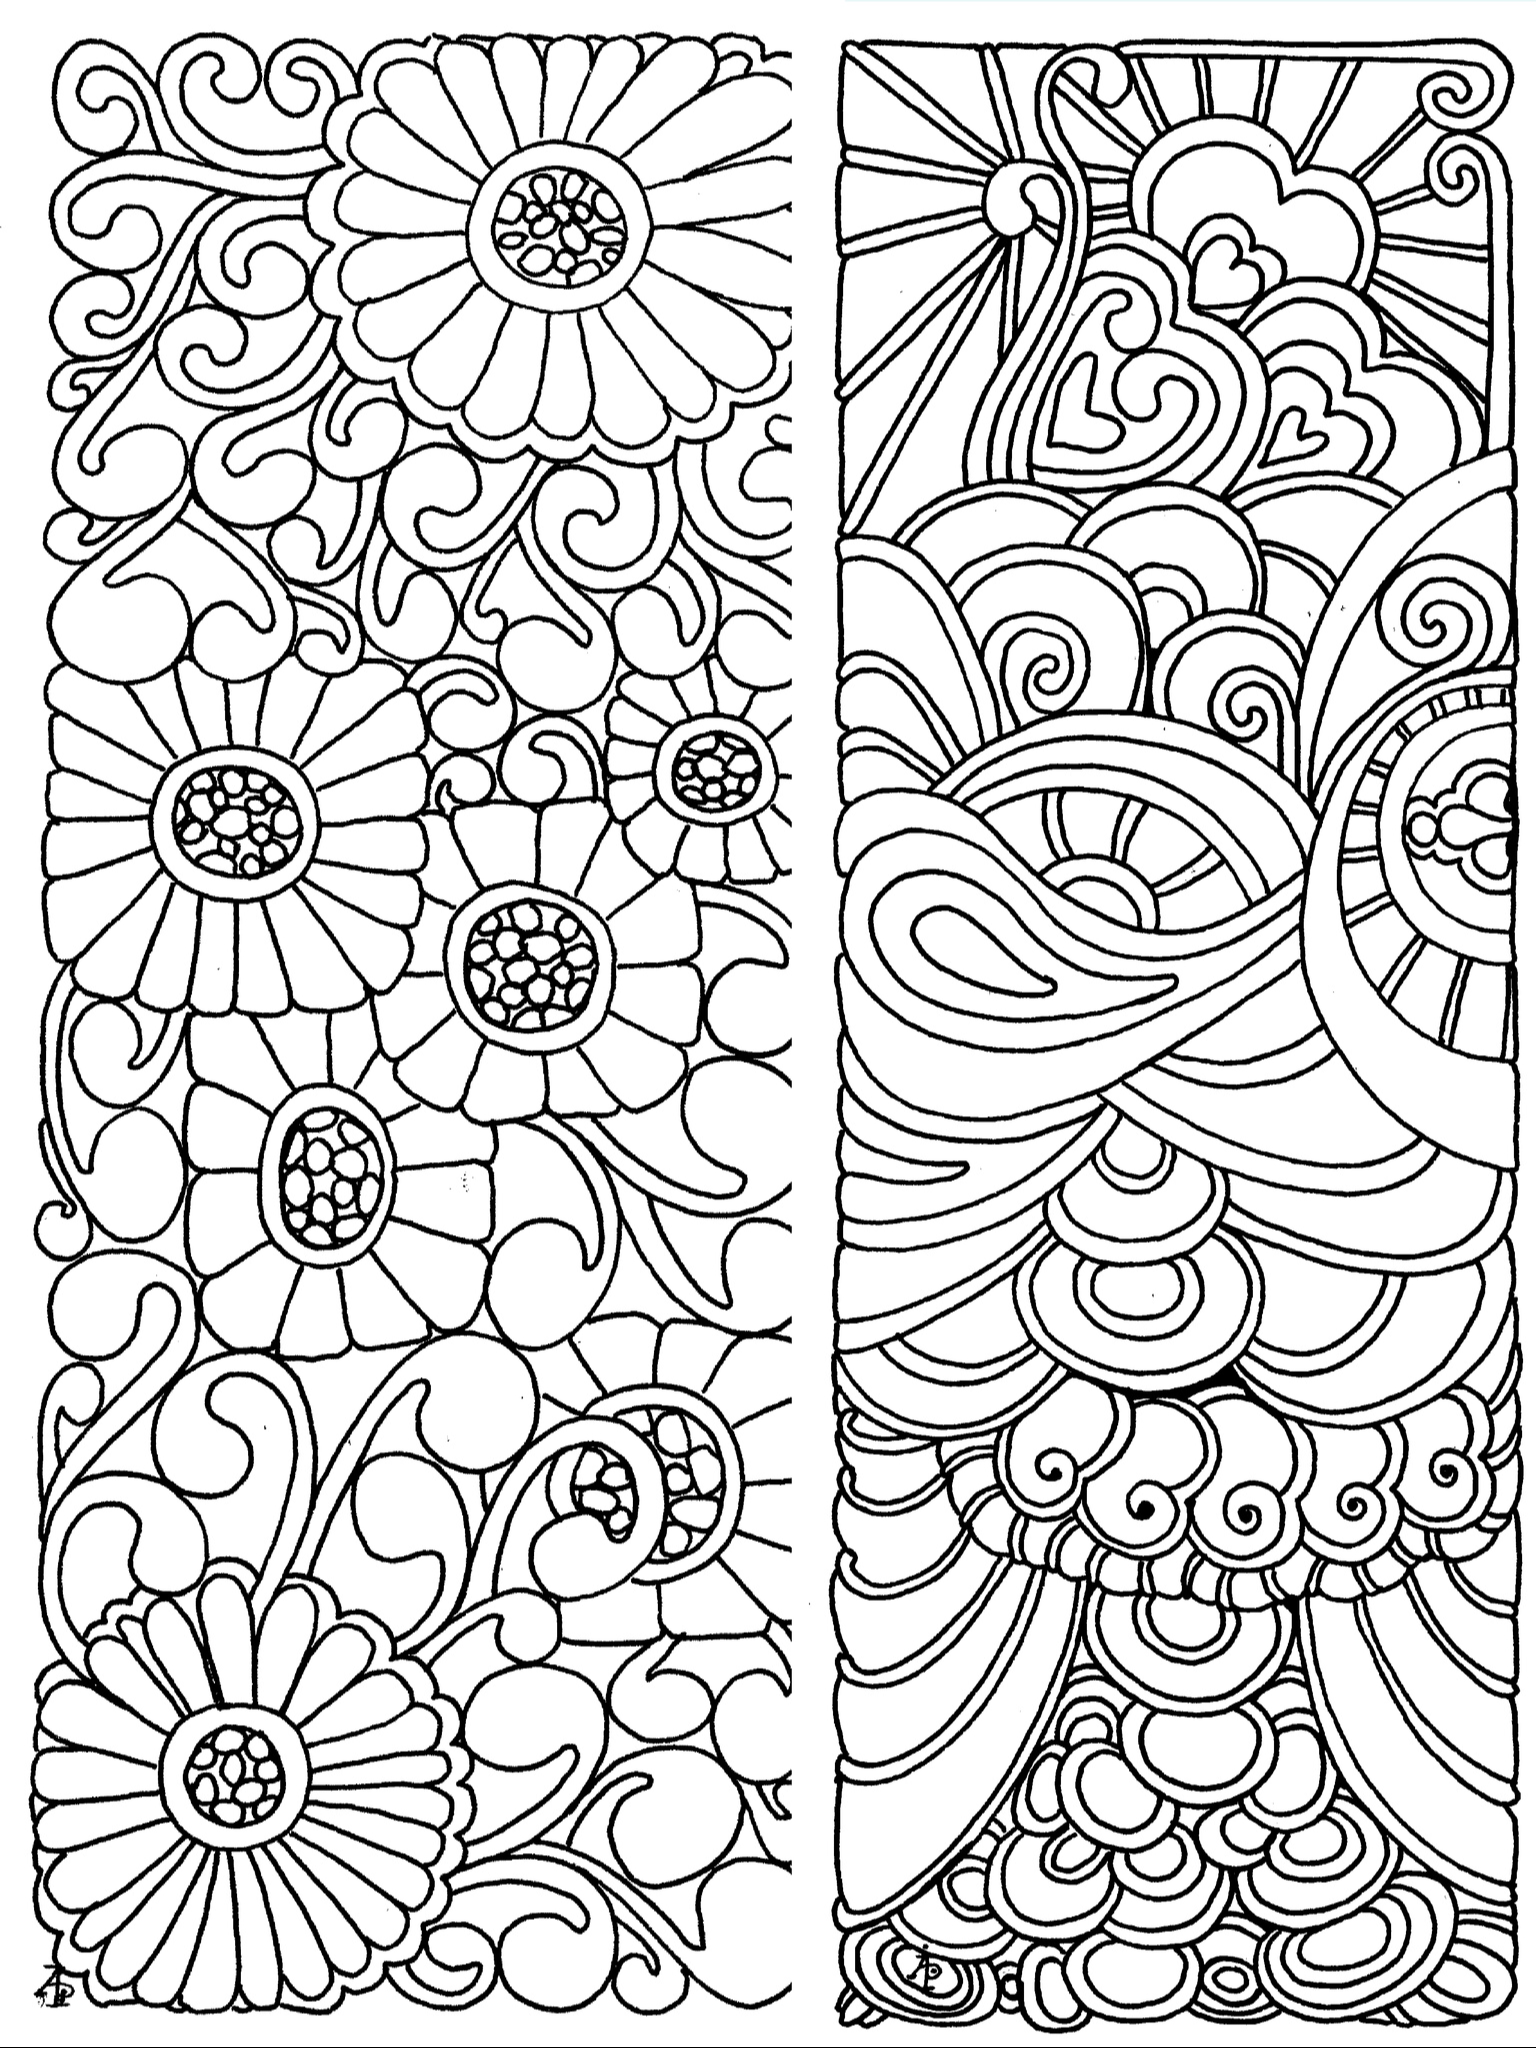 Bookmark Coloring Pages at Free printable colorings